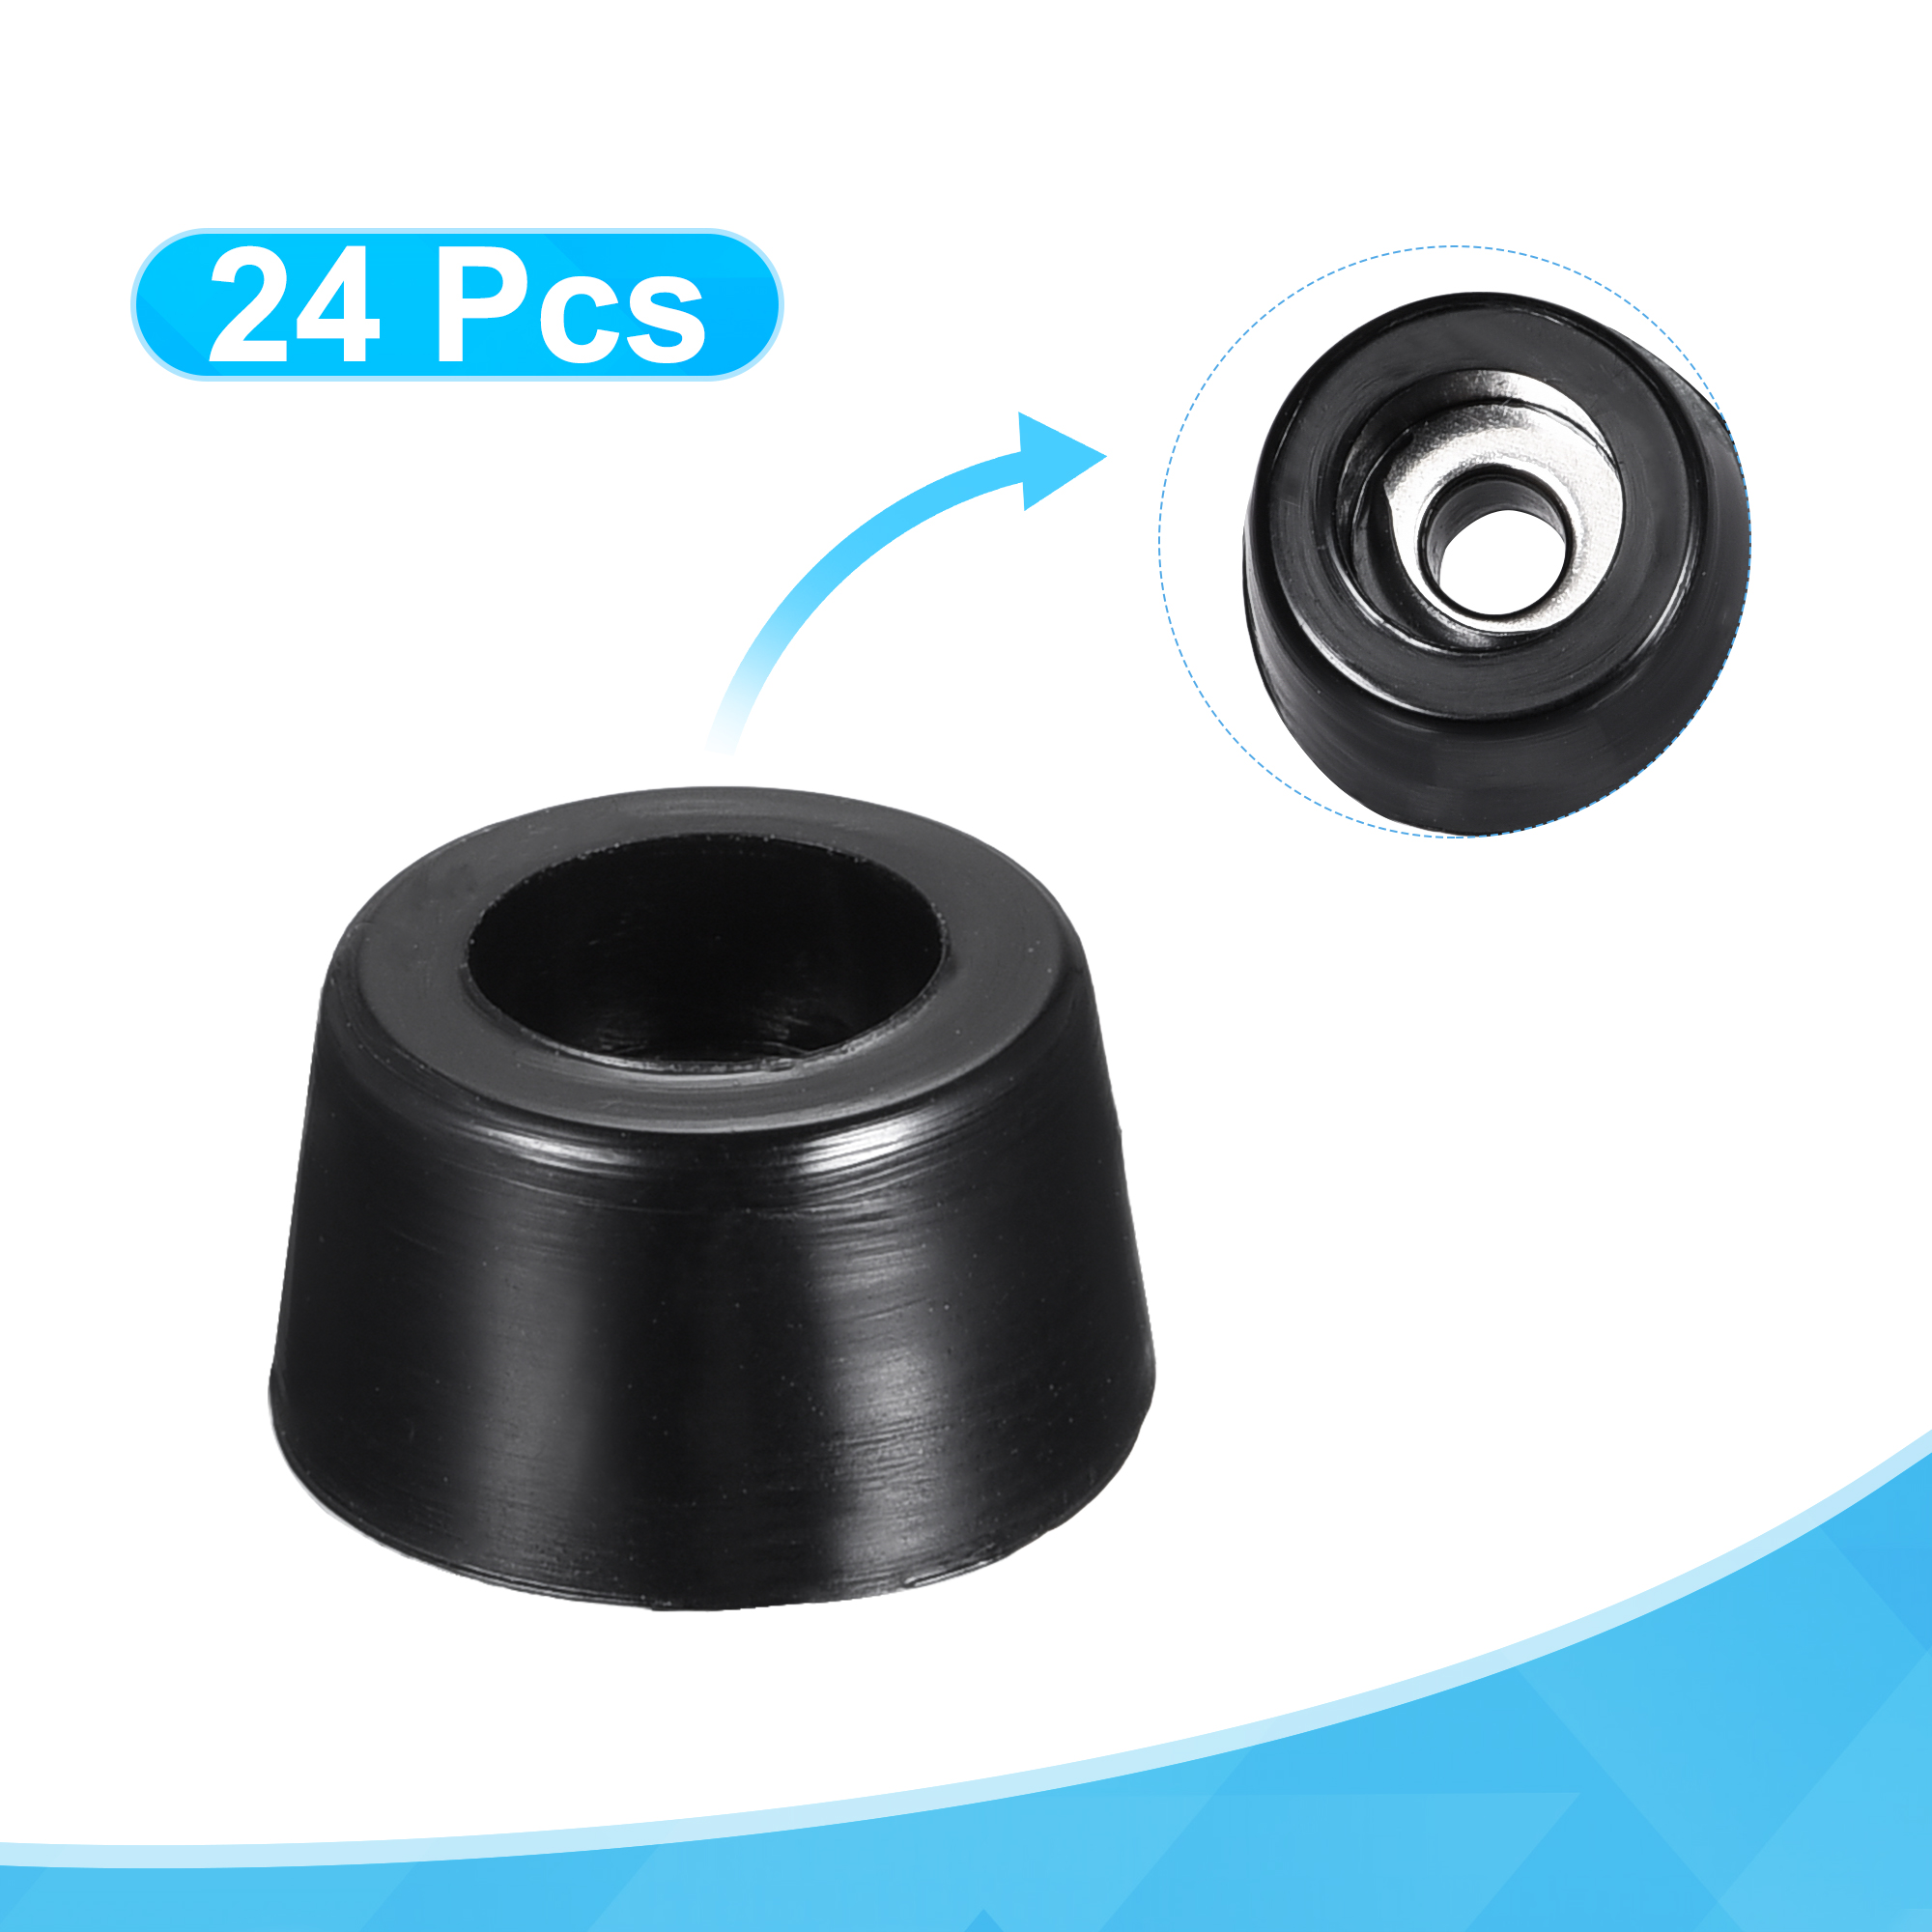 Uxcell 0.47" W x  0.28" H Rubber Bumper Feet, Stainless Steel Screws and Washer 24 Pack - image 4 of 5